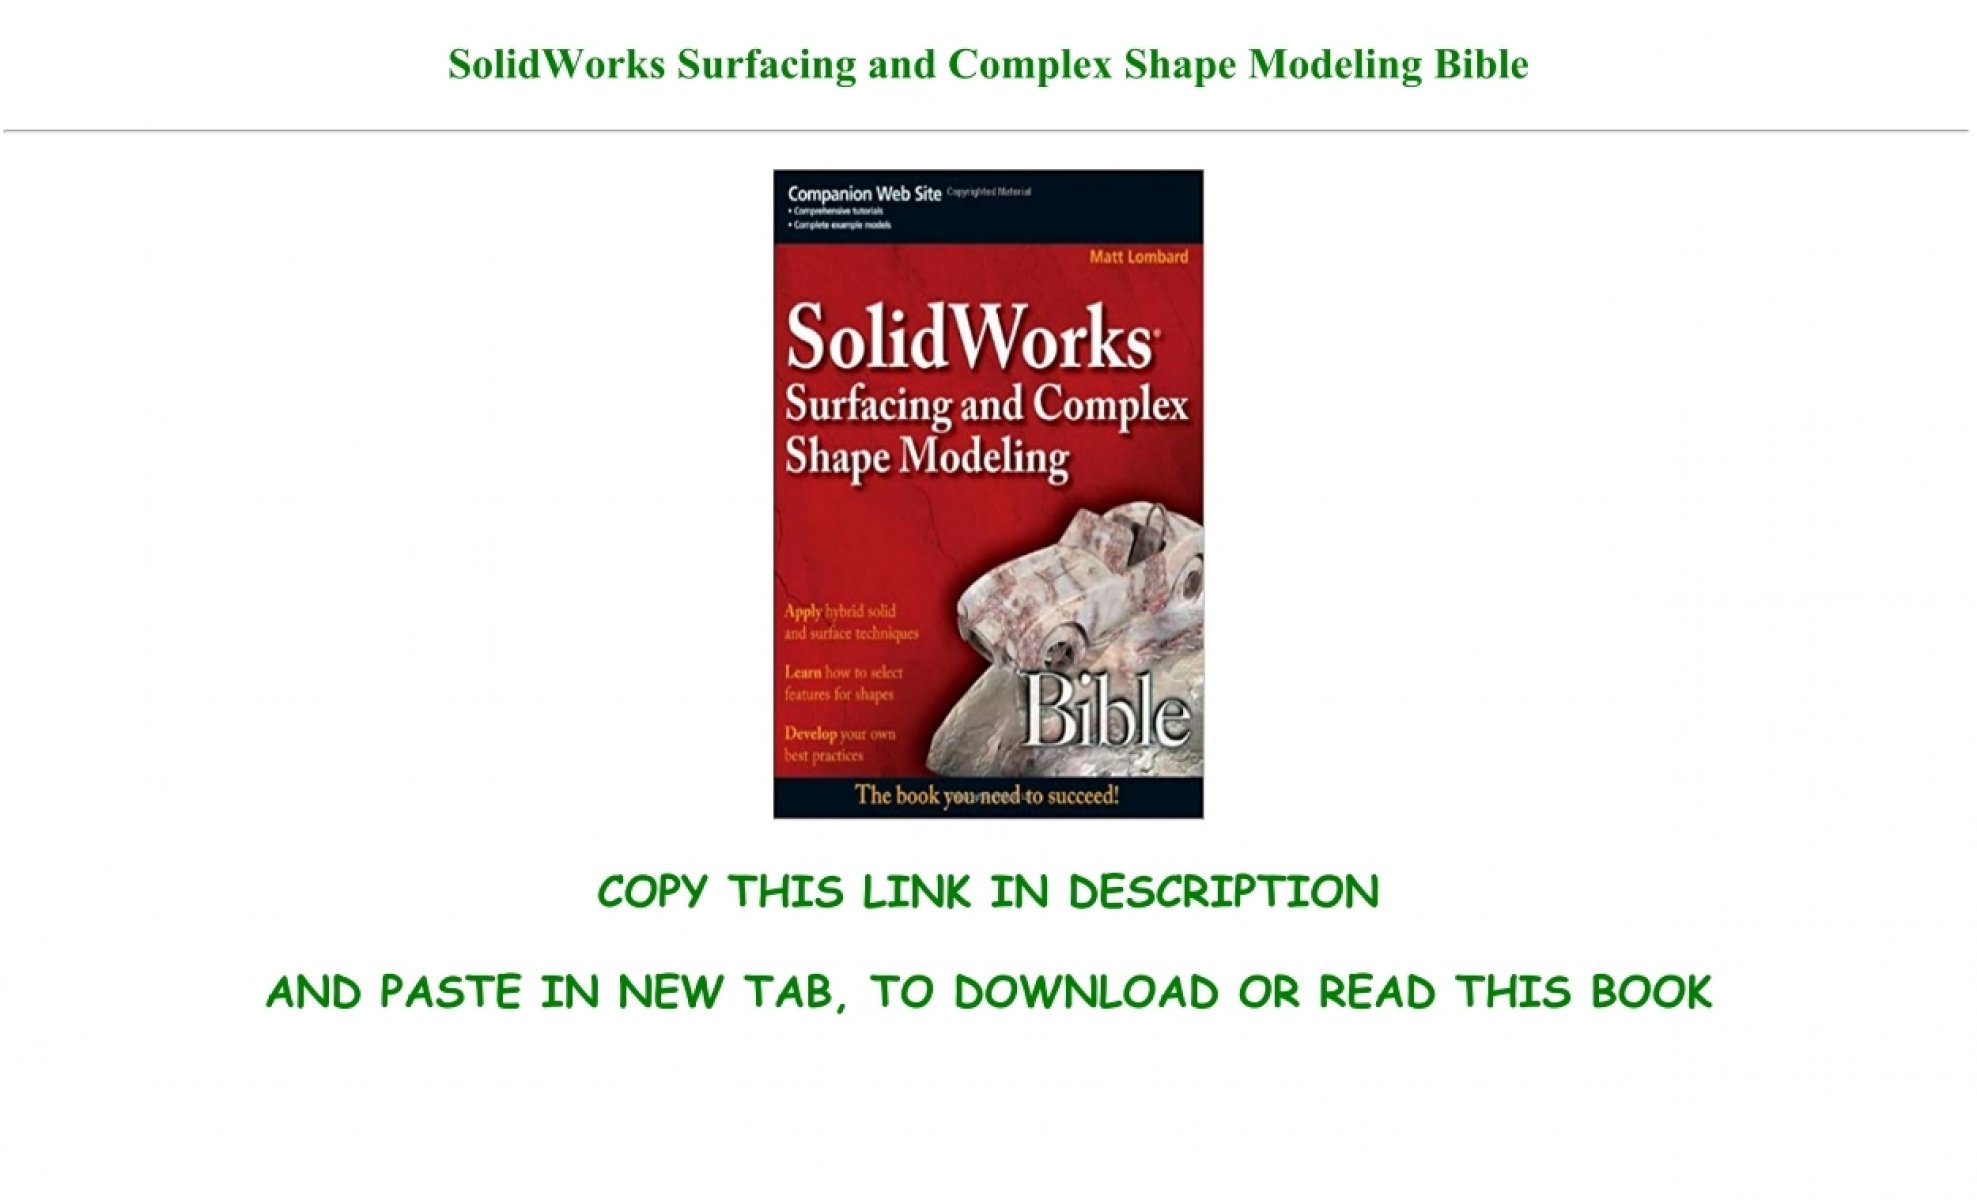 solidworks surfacing and complex shape modeling bible pdf free download